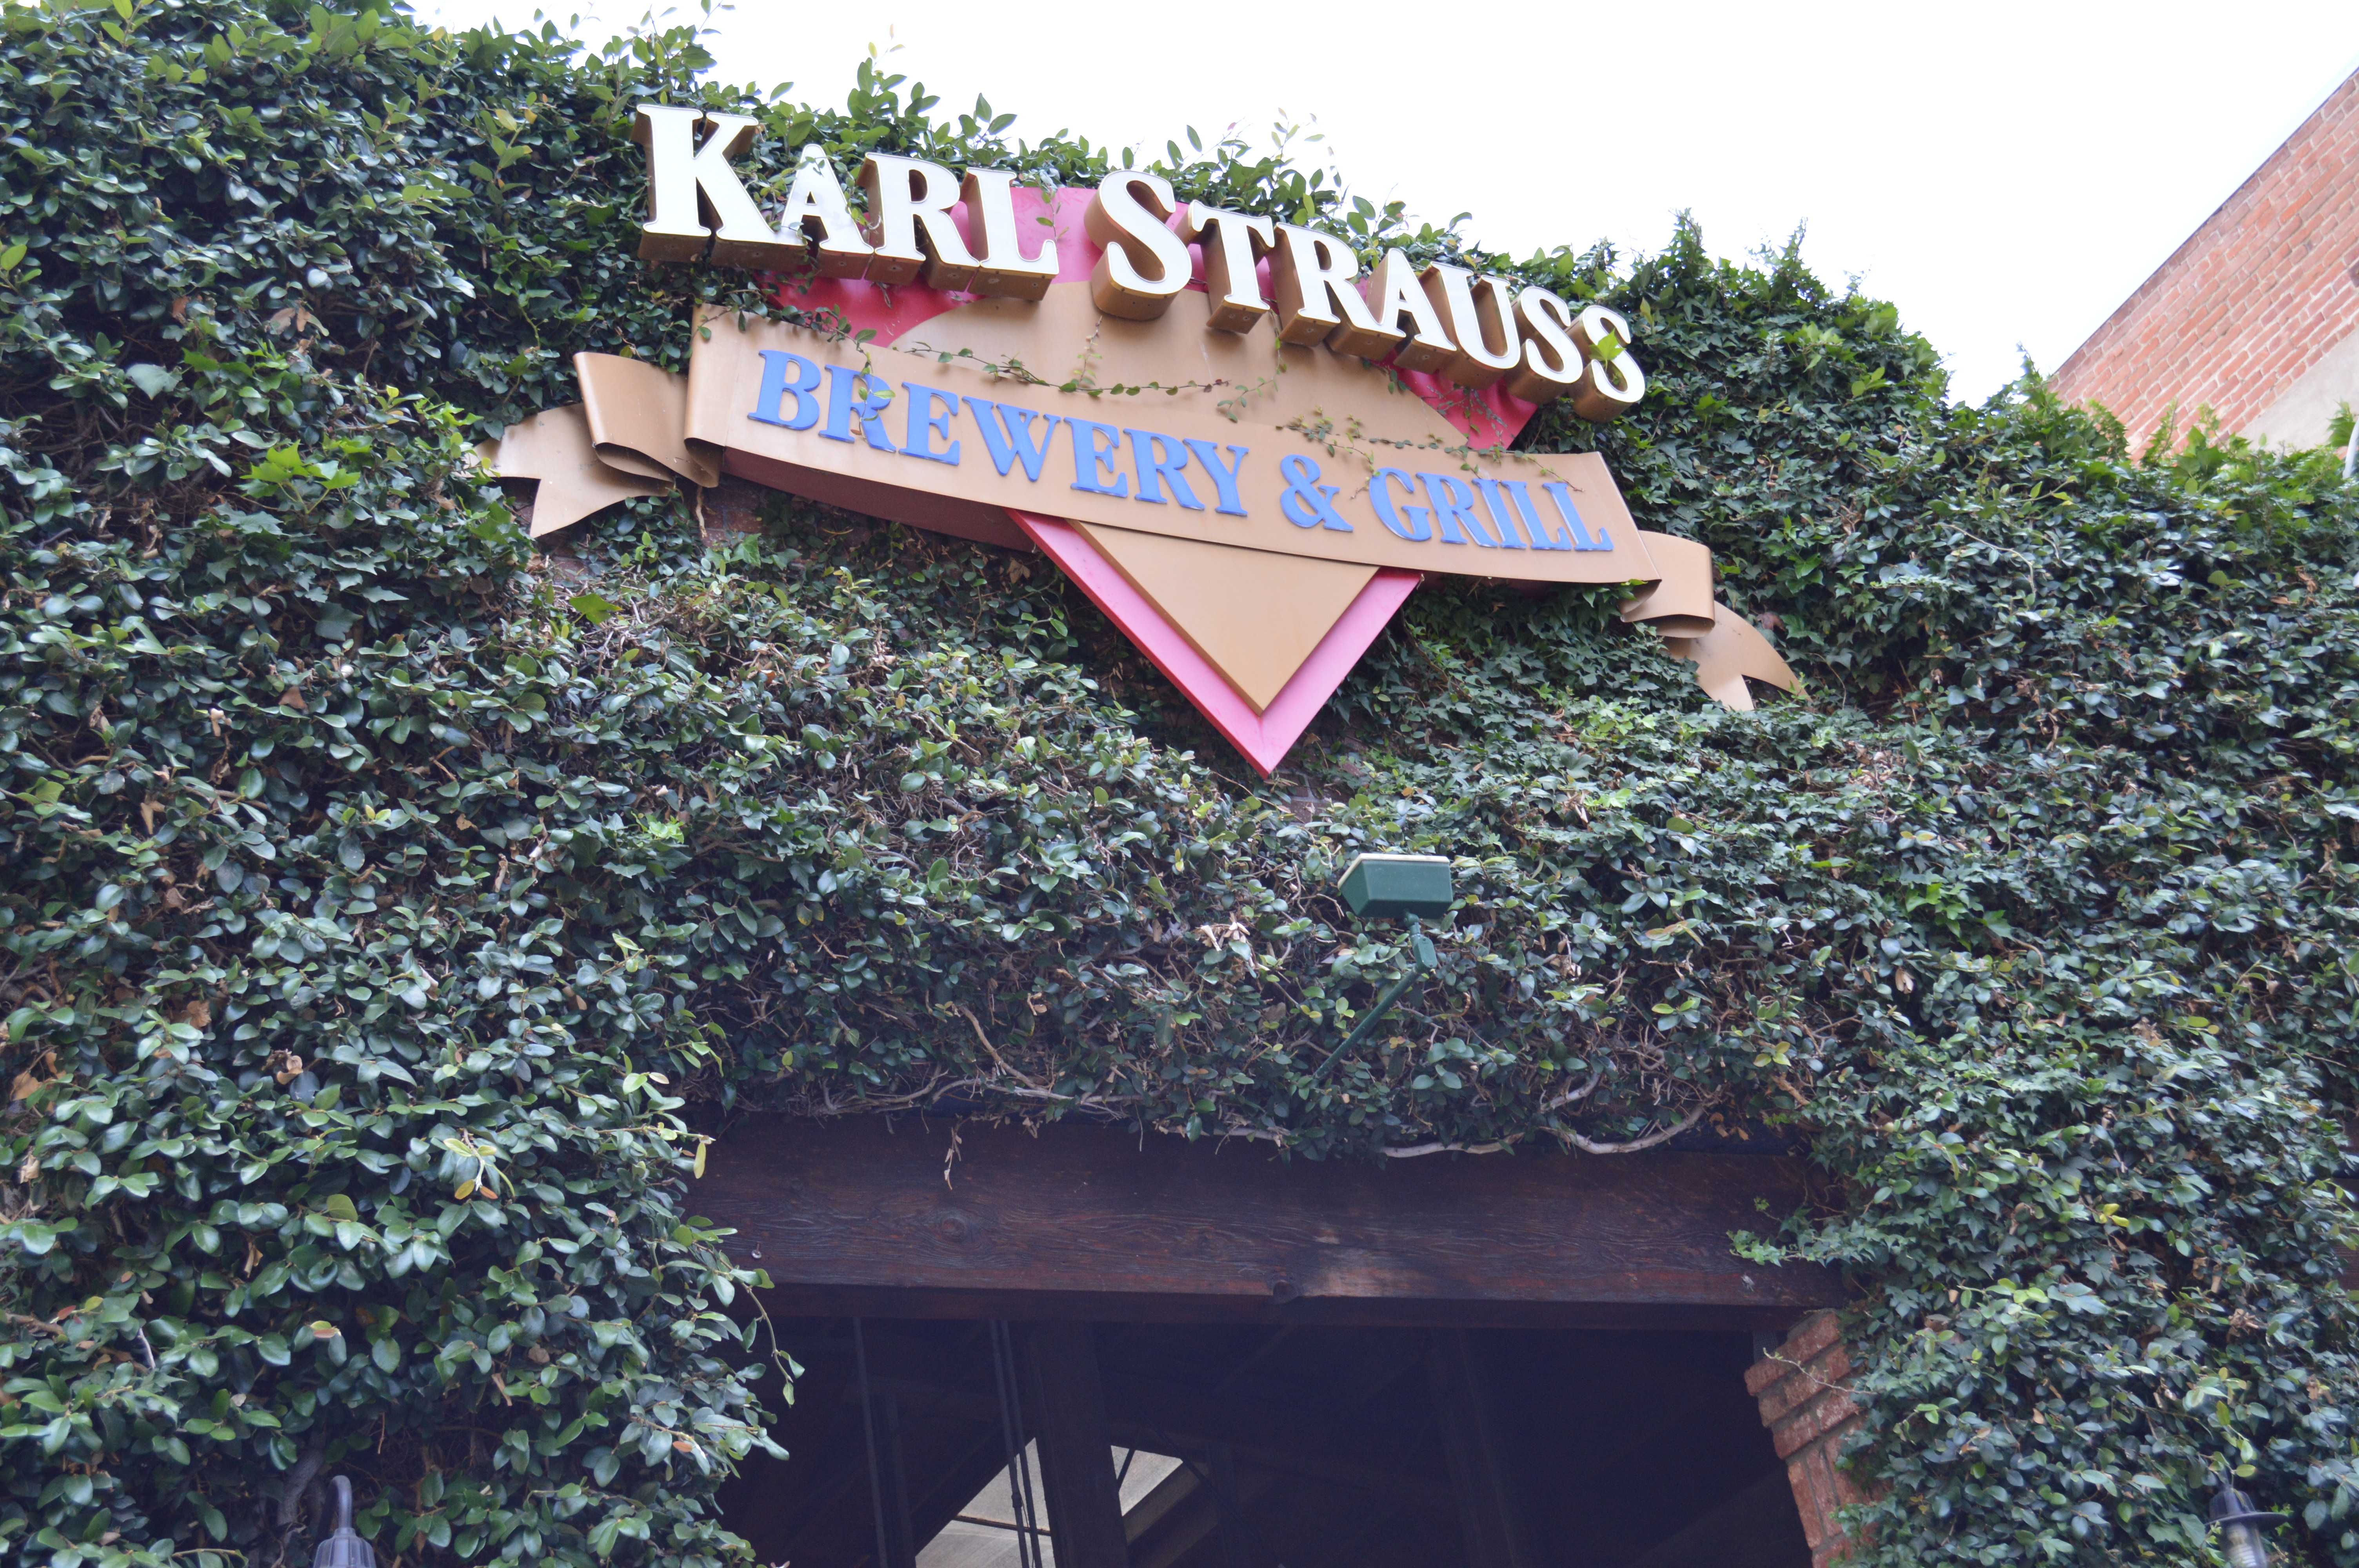 Karl Strauss Brewery and Grill on India St. in Little Italy/Downtown. Photo credit: Michelle Moran